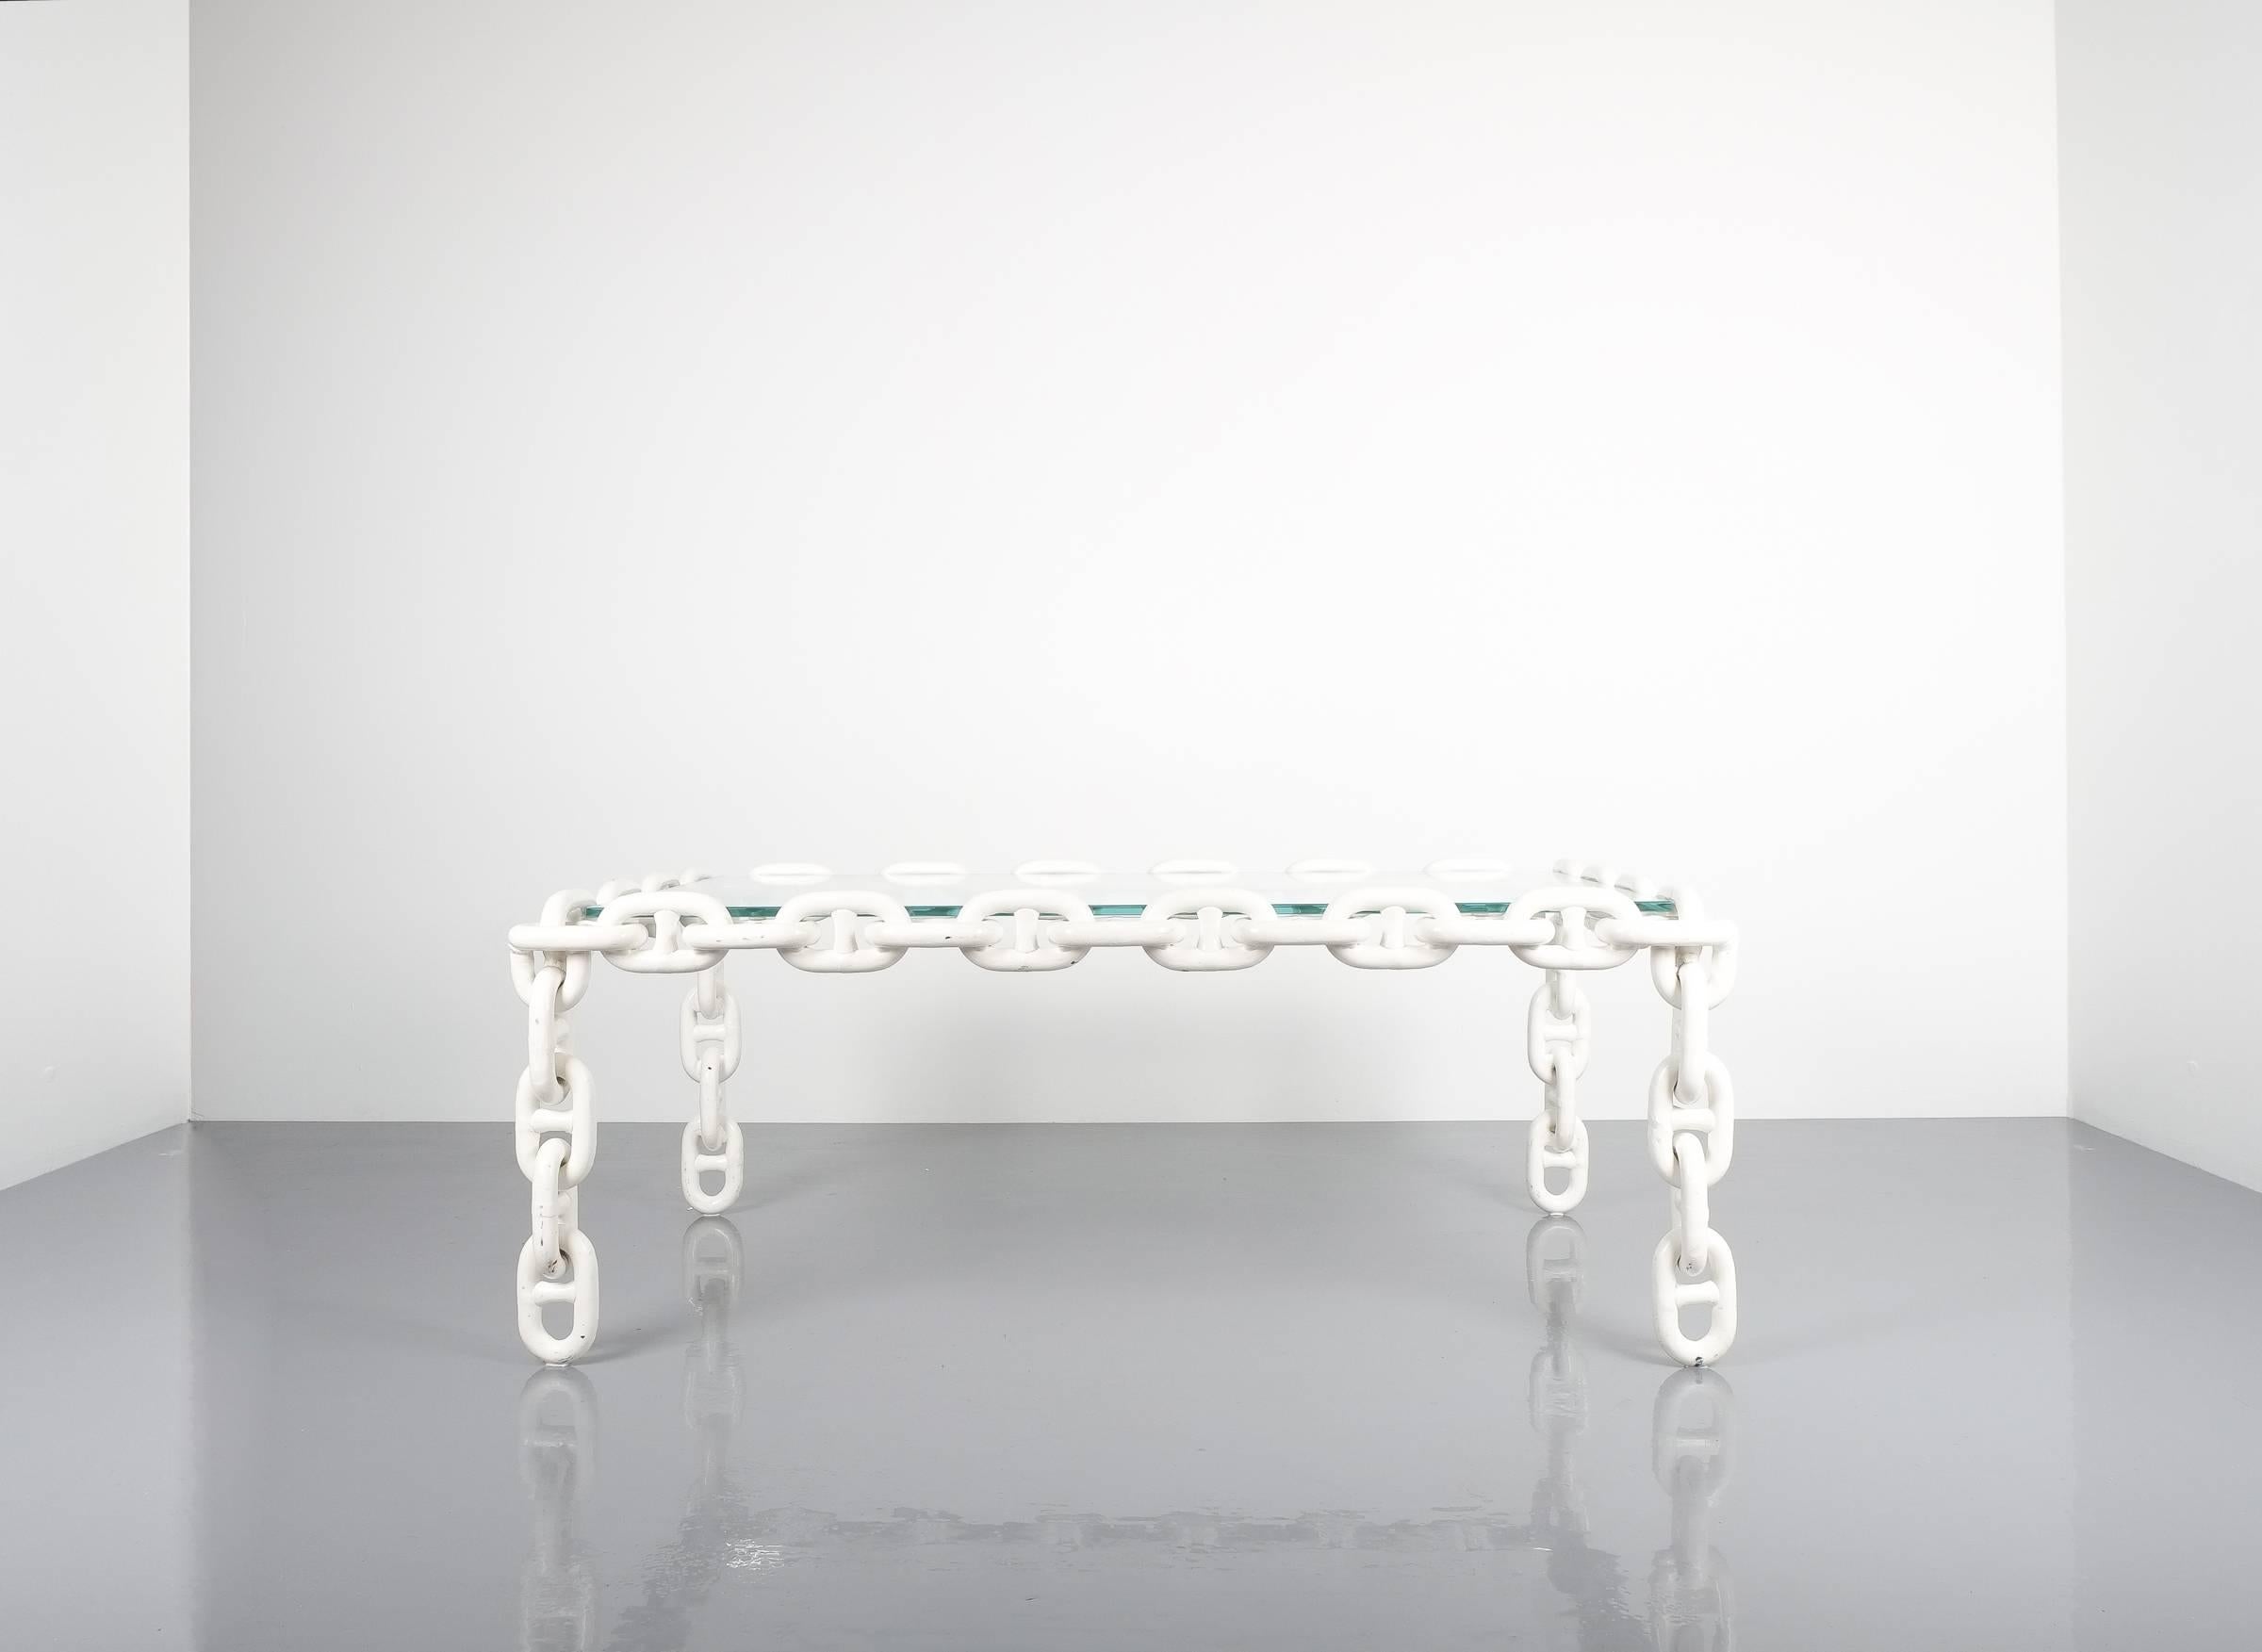 One of a kind white chain-link table

Dimensions are 46